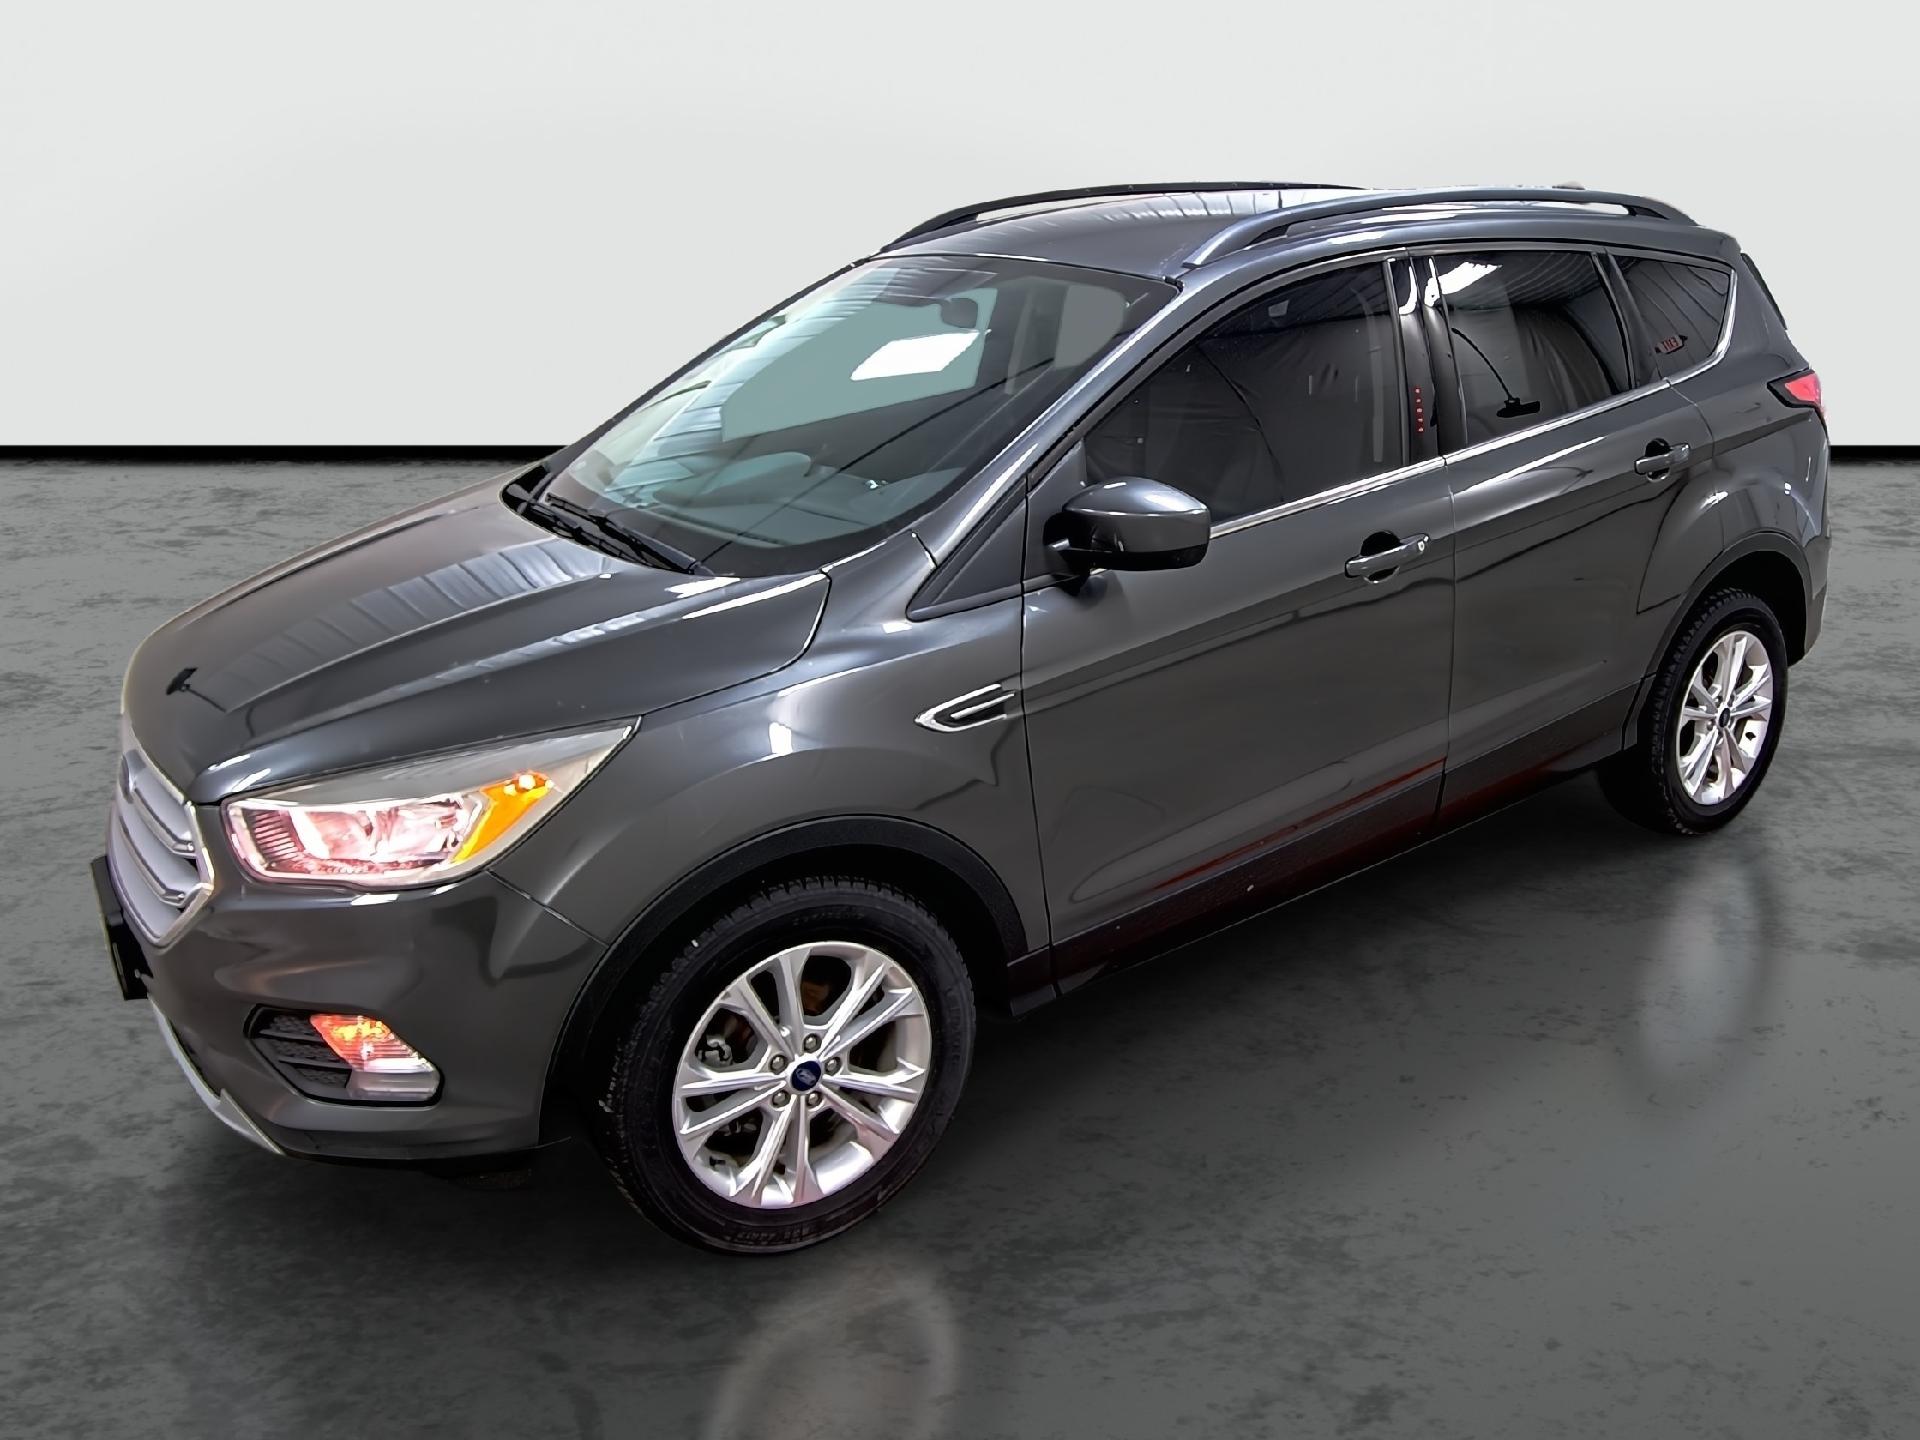 2018 Ford Escape Vehicle Photo in HANNIBAL, MO 63401-5401